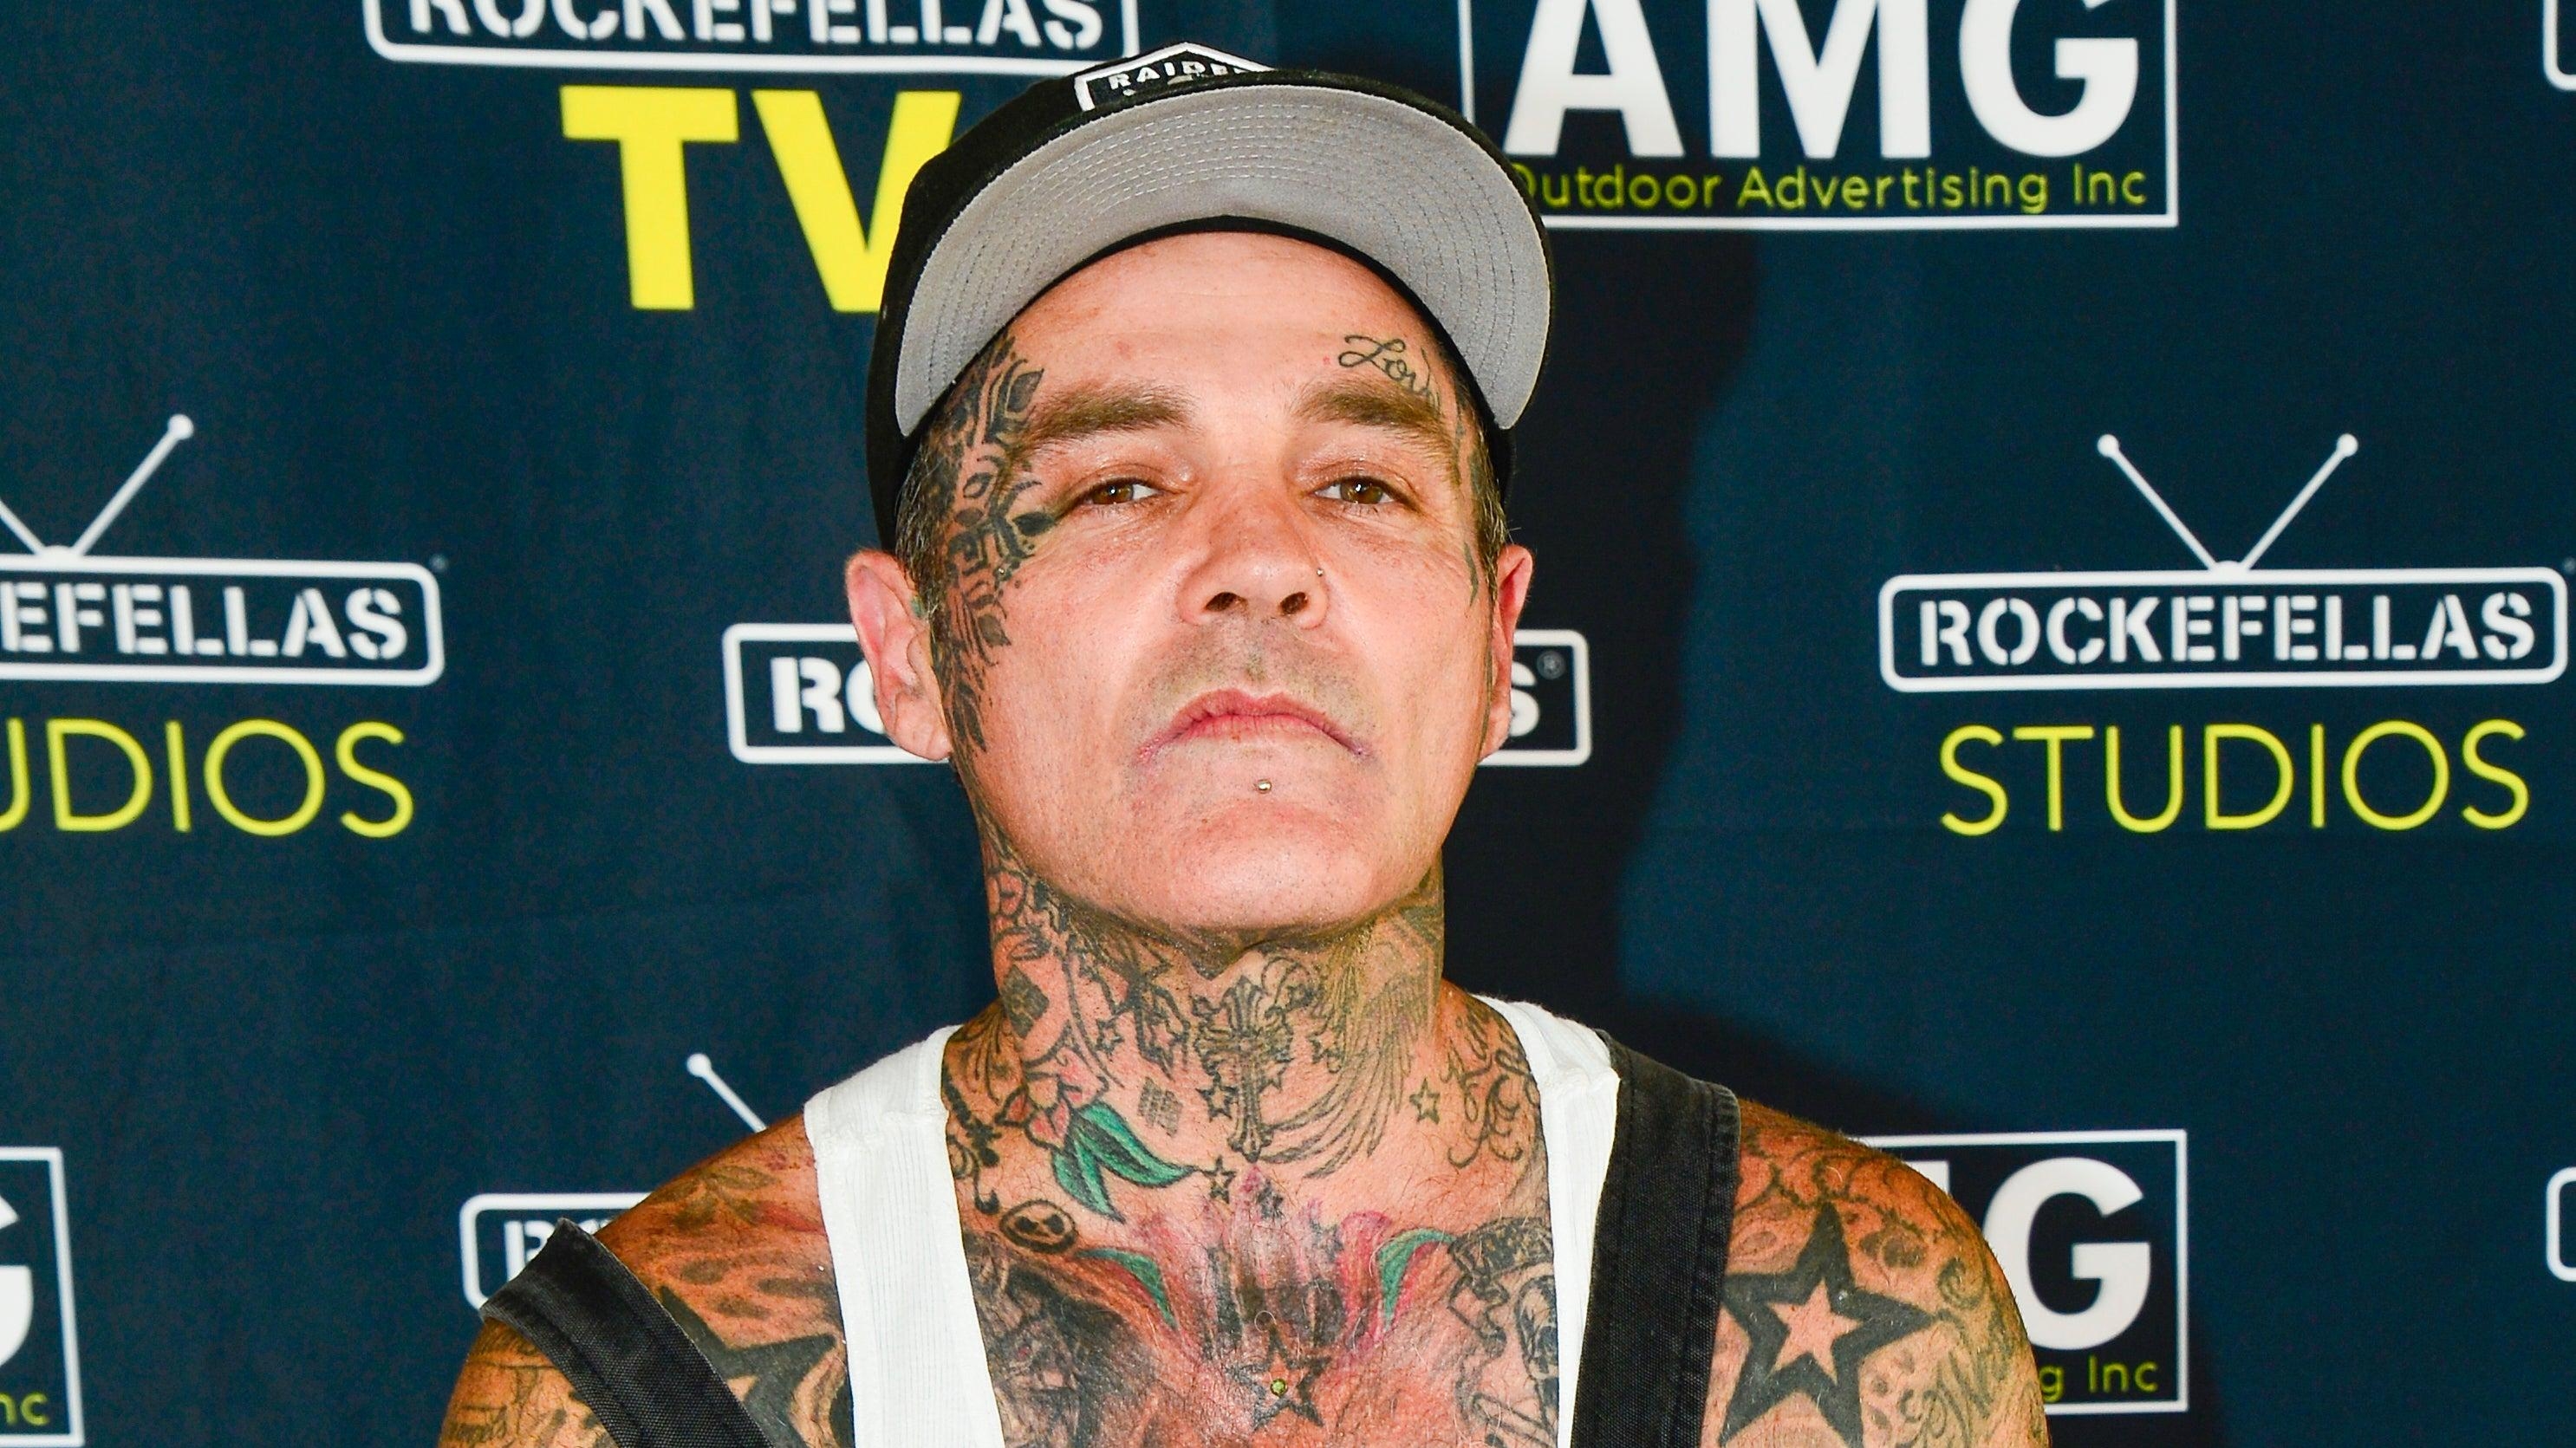 R.I.P. Shifty Shellshock, Crazy Town frontman and “Butterfly” singer